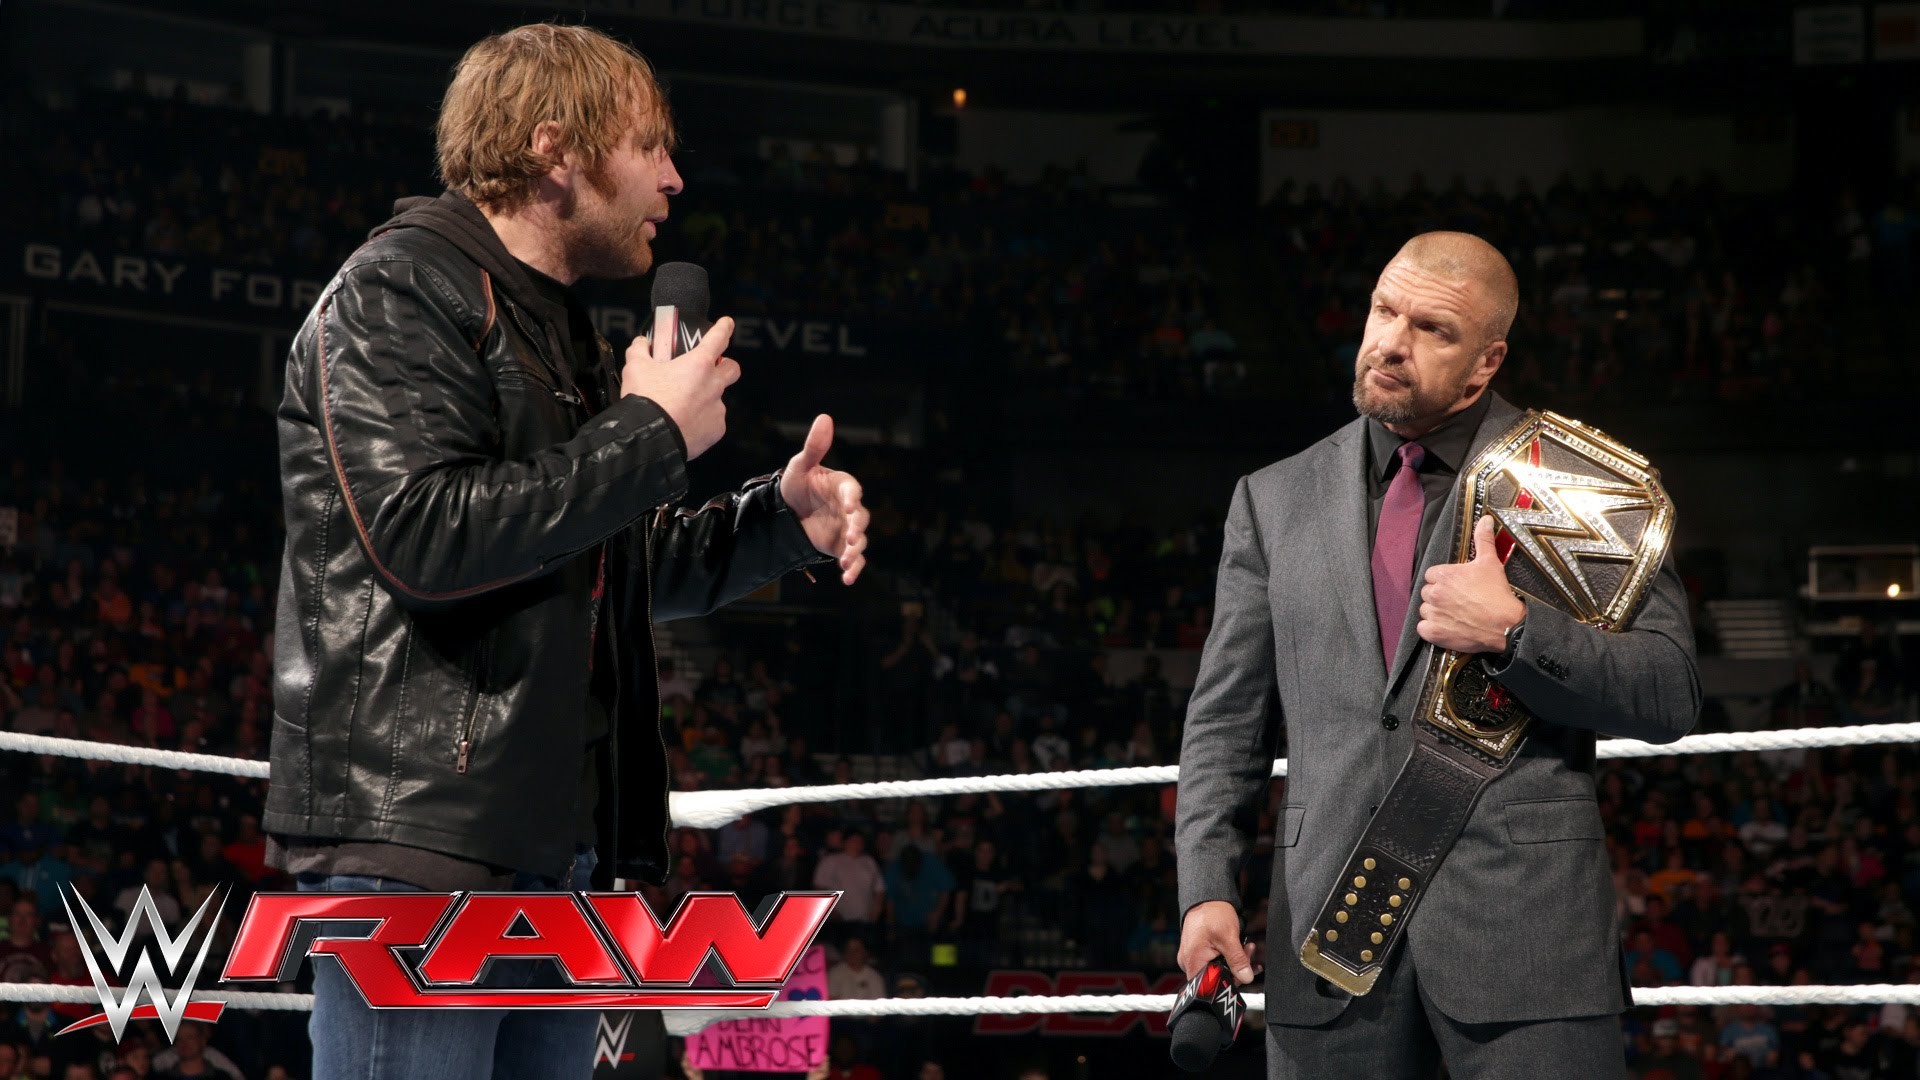 1920x1080 Dean Ambrose interrupts Triple H with a bold challenge: Raw, February 29,  2016 - YouTube